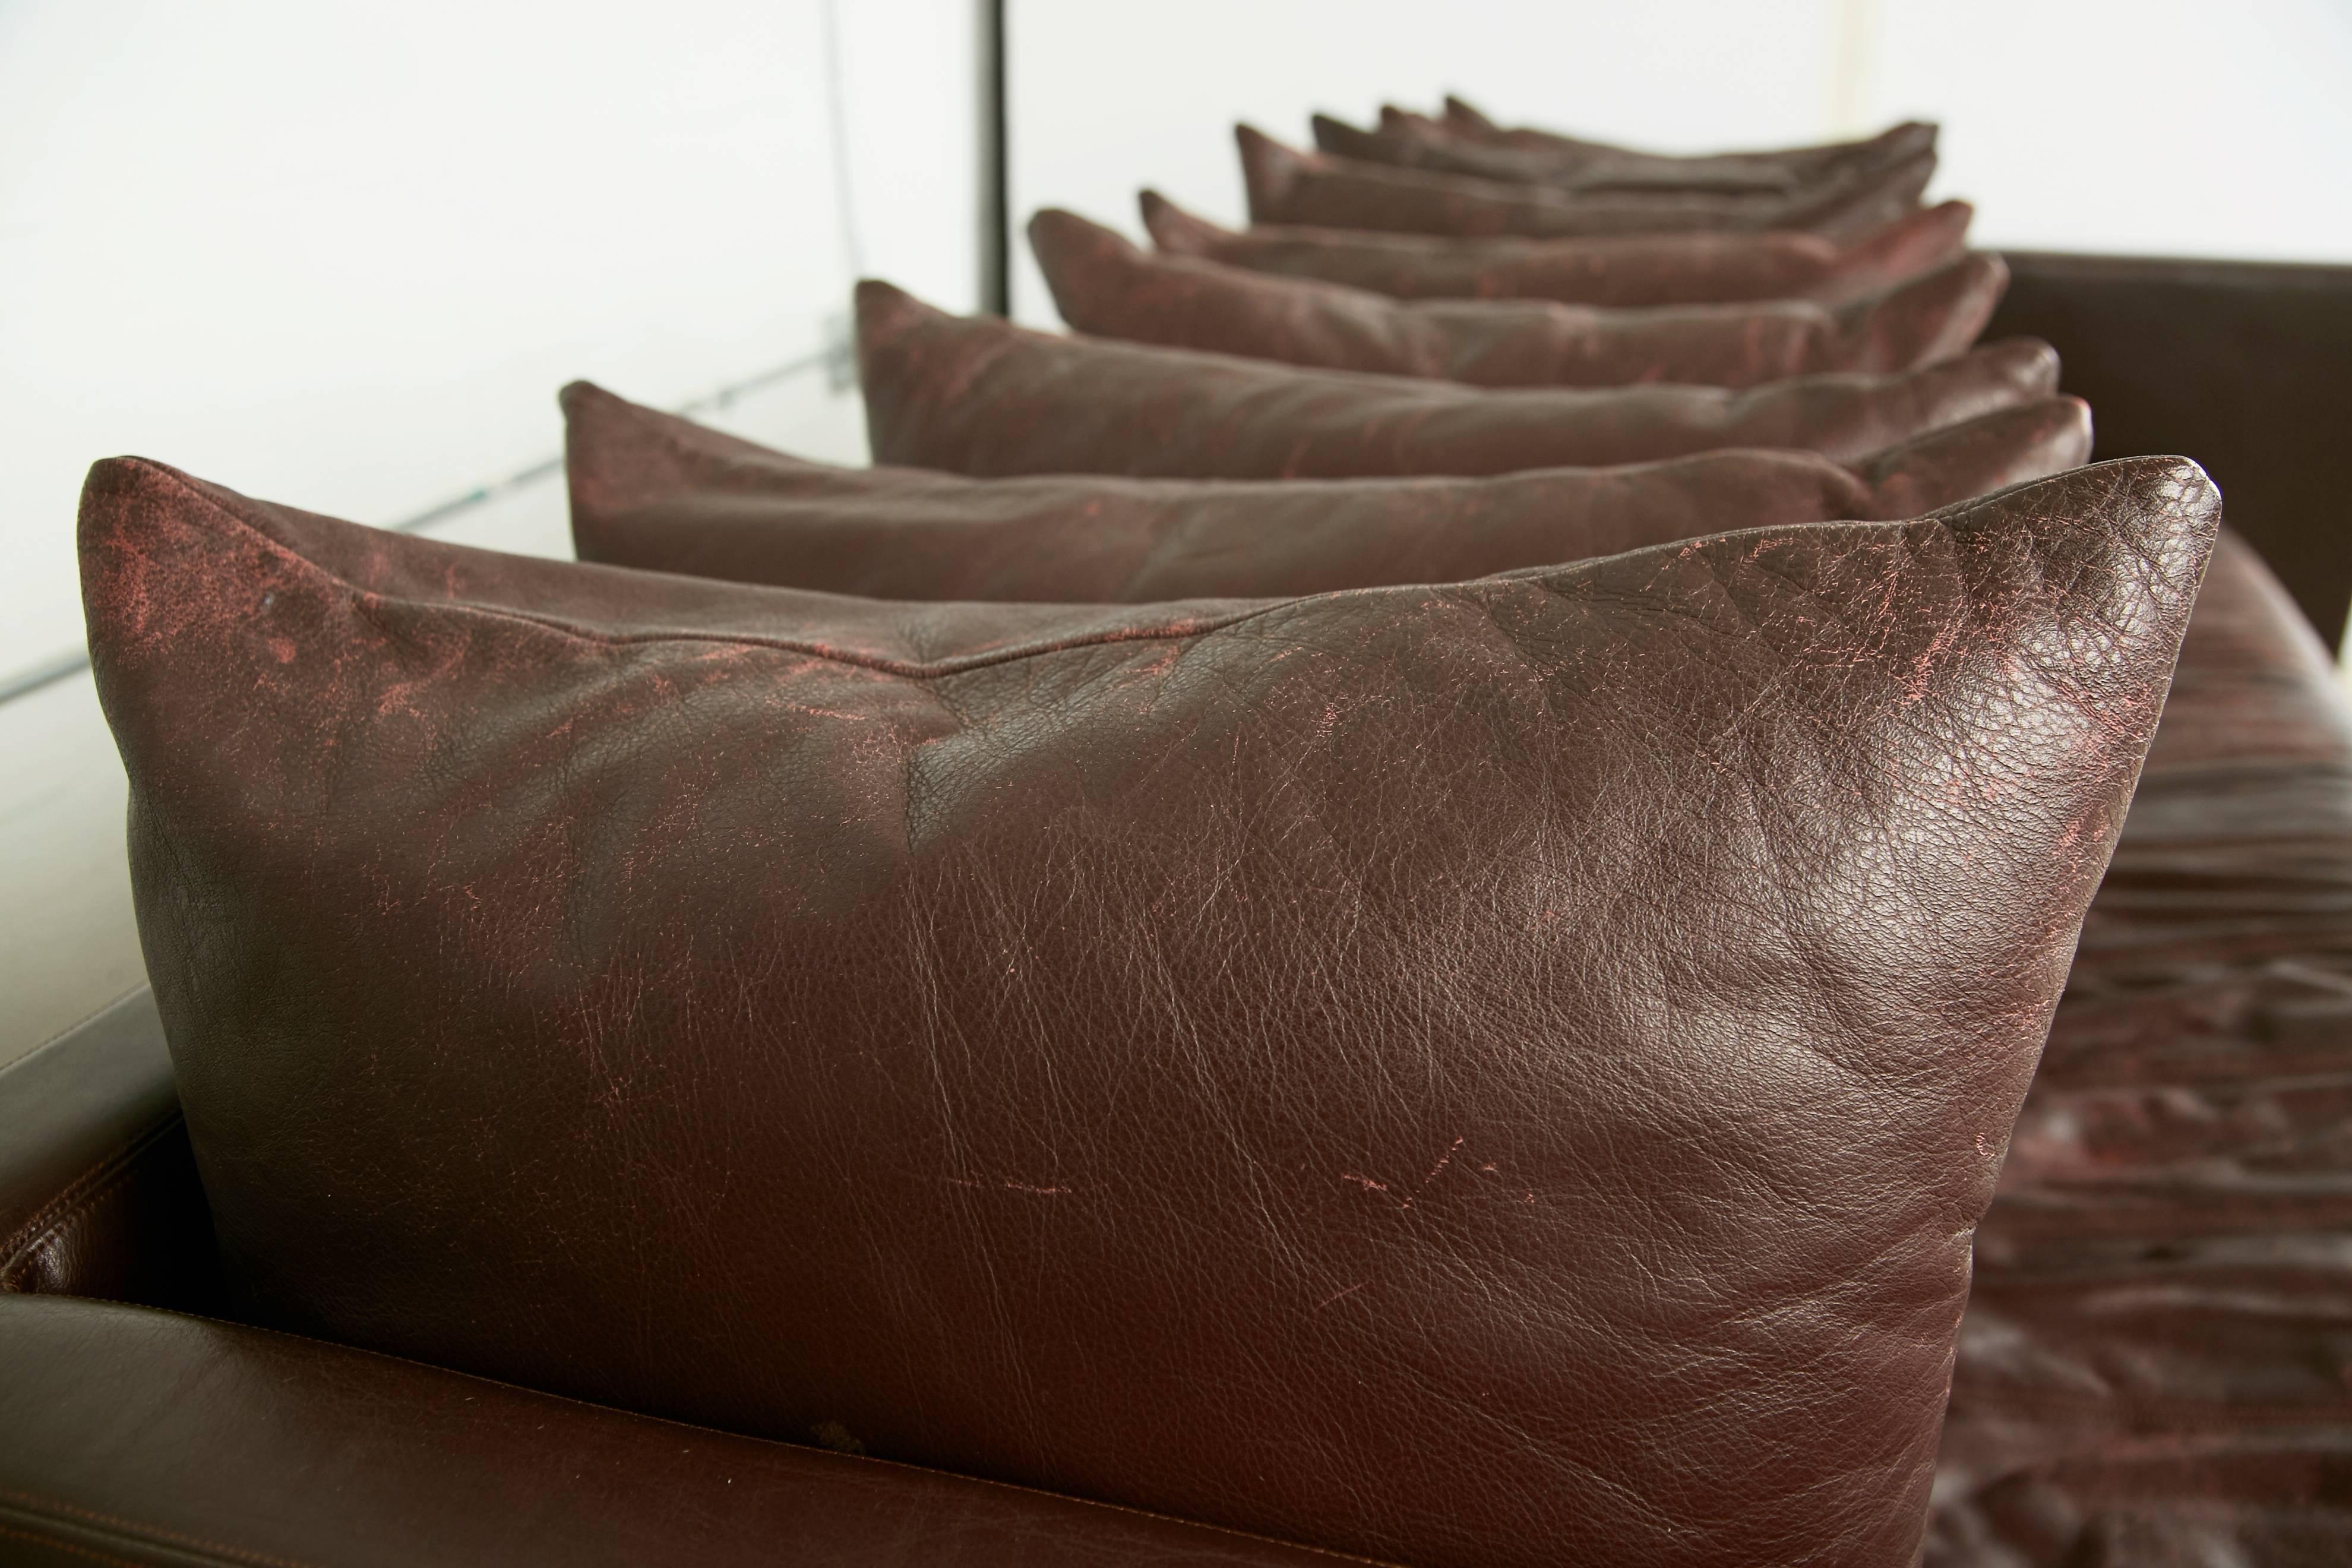 Late 20th Century Architectural Leather Sofa by Joseph D'Urso for Knoll International, circa 1980